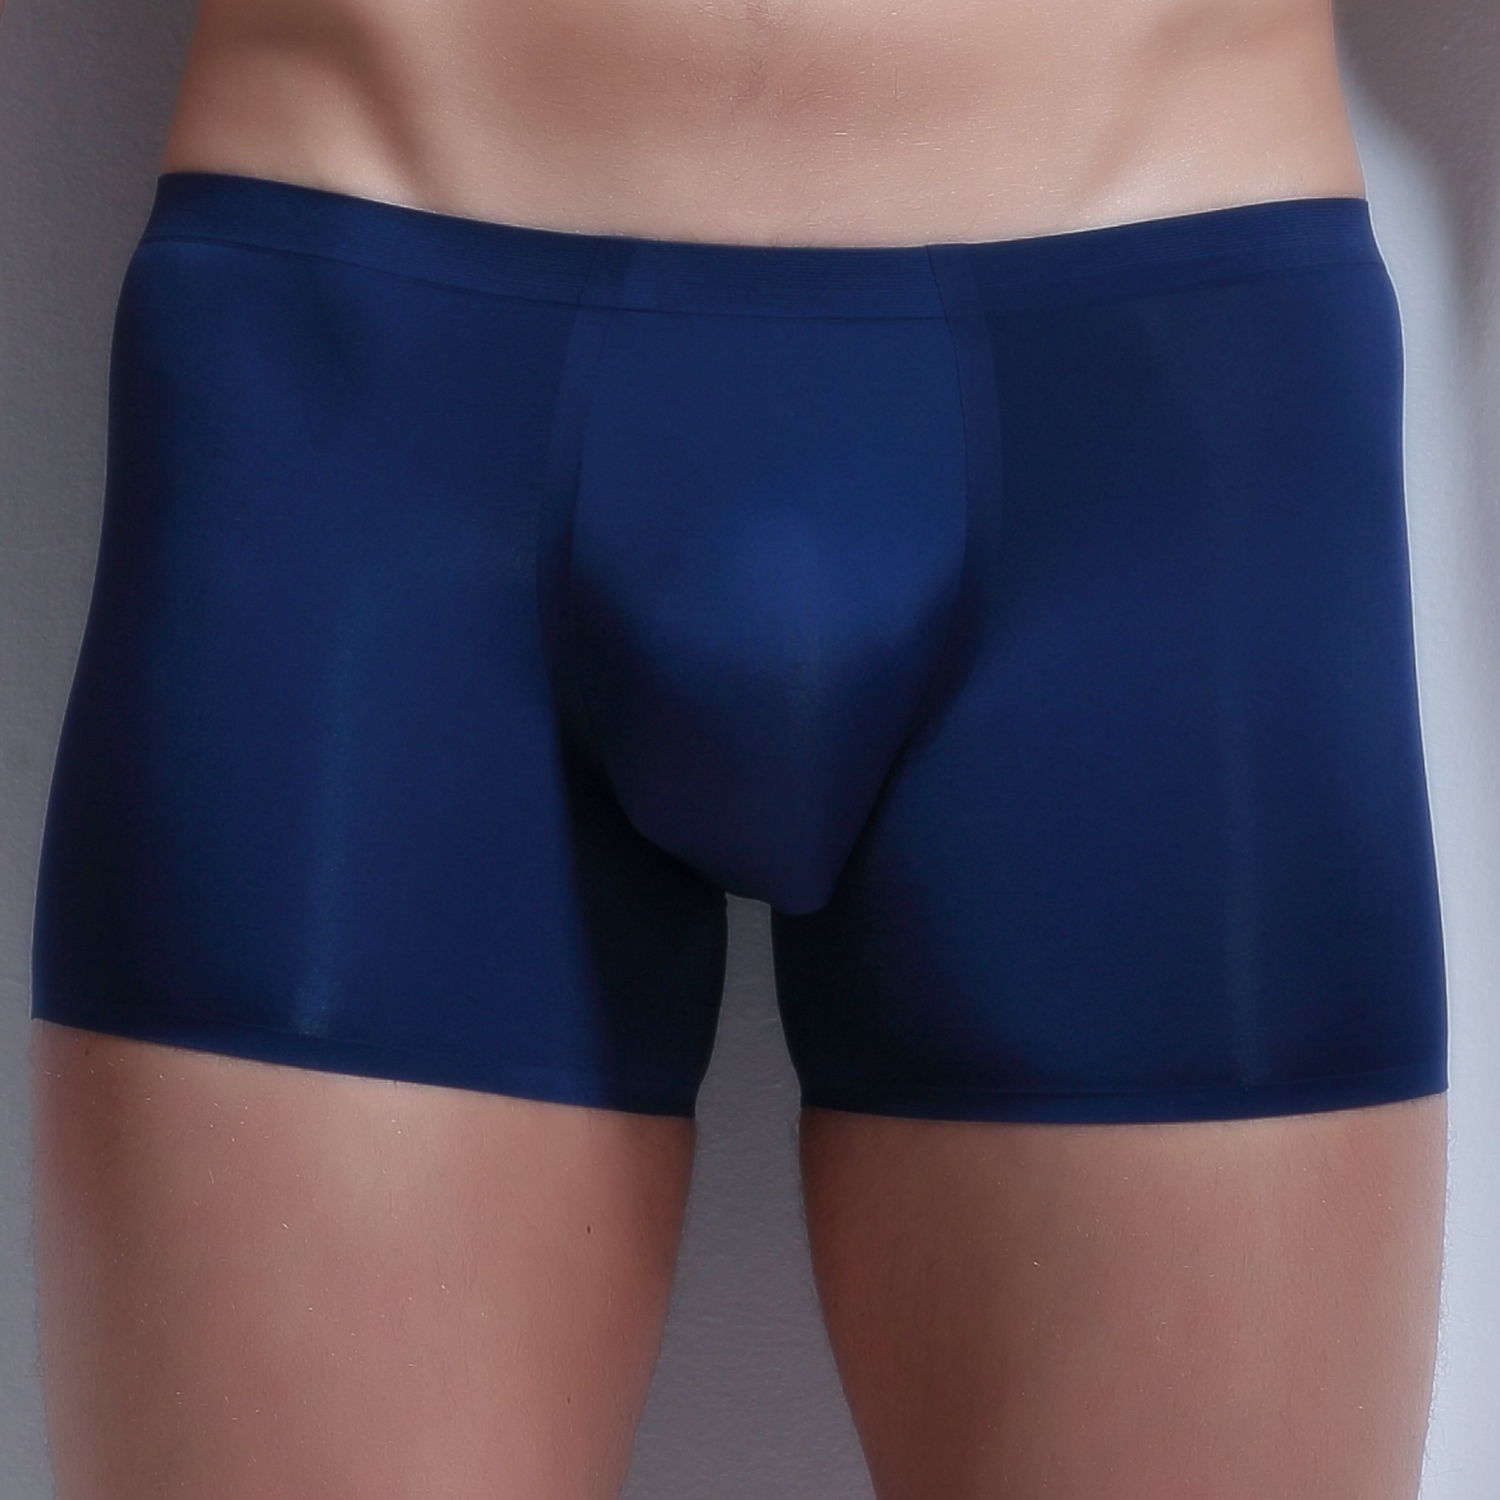 Seamless Mens Boxer Shorts Bulge Pouch Underwear Trunks Soft Smooth Underpants Ebay 6598